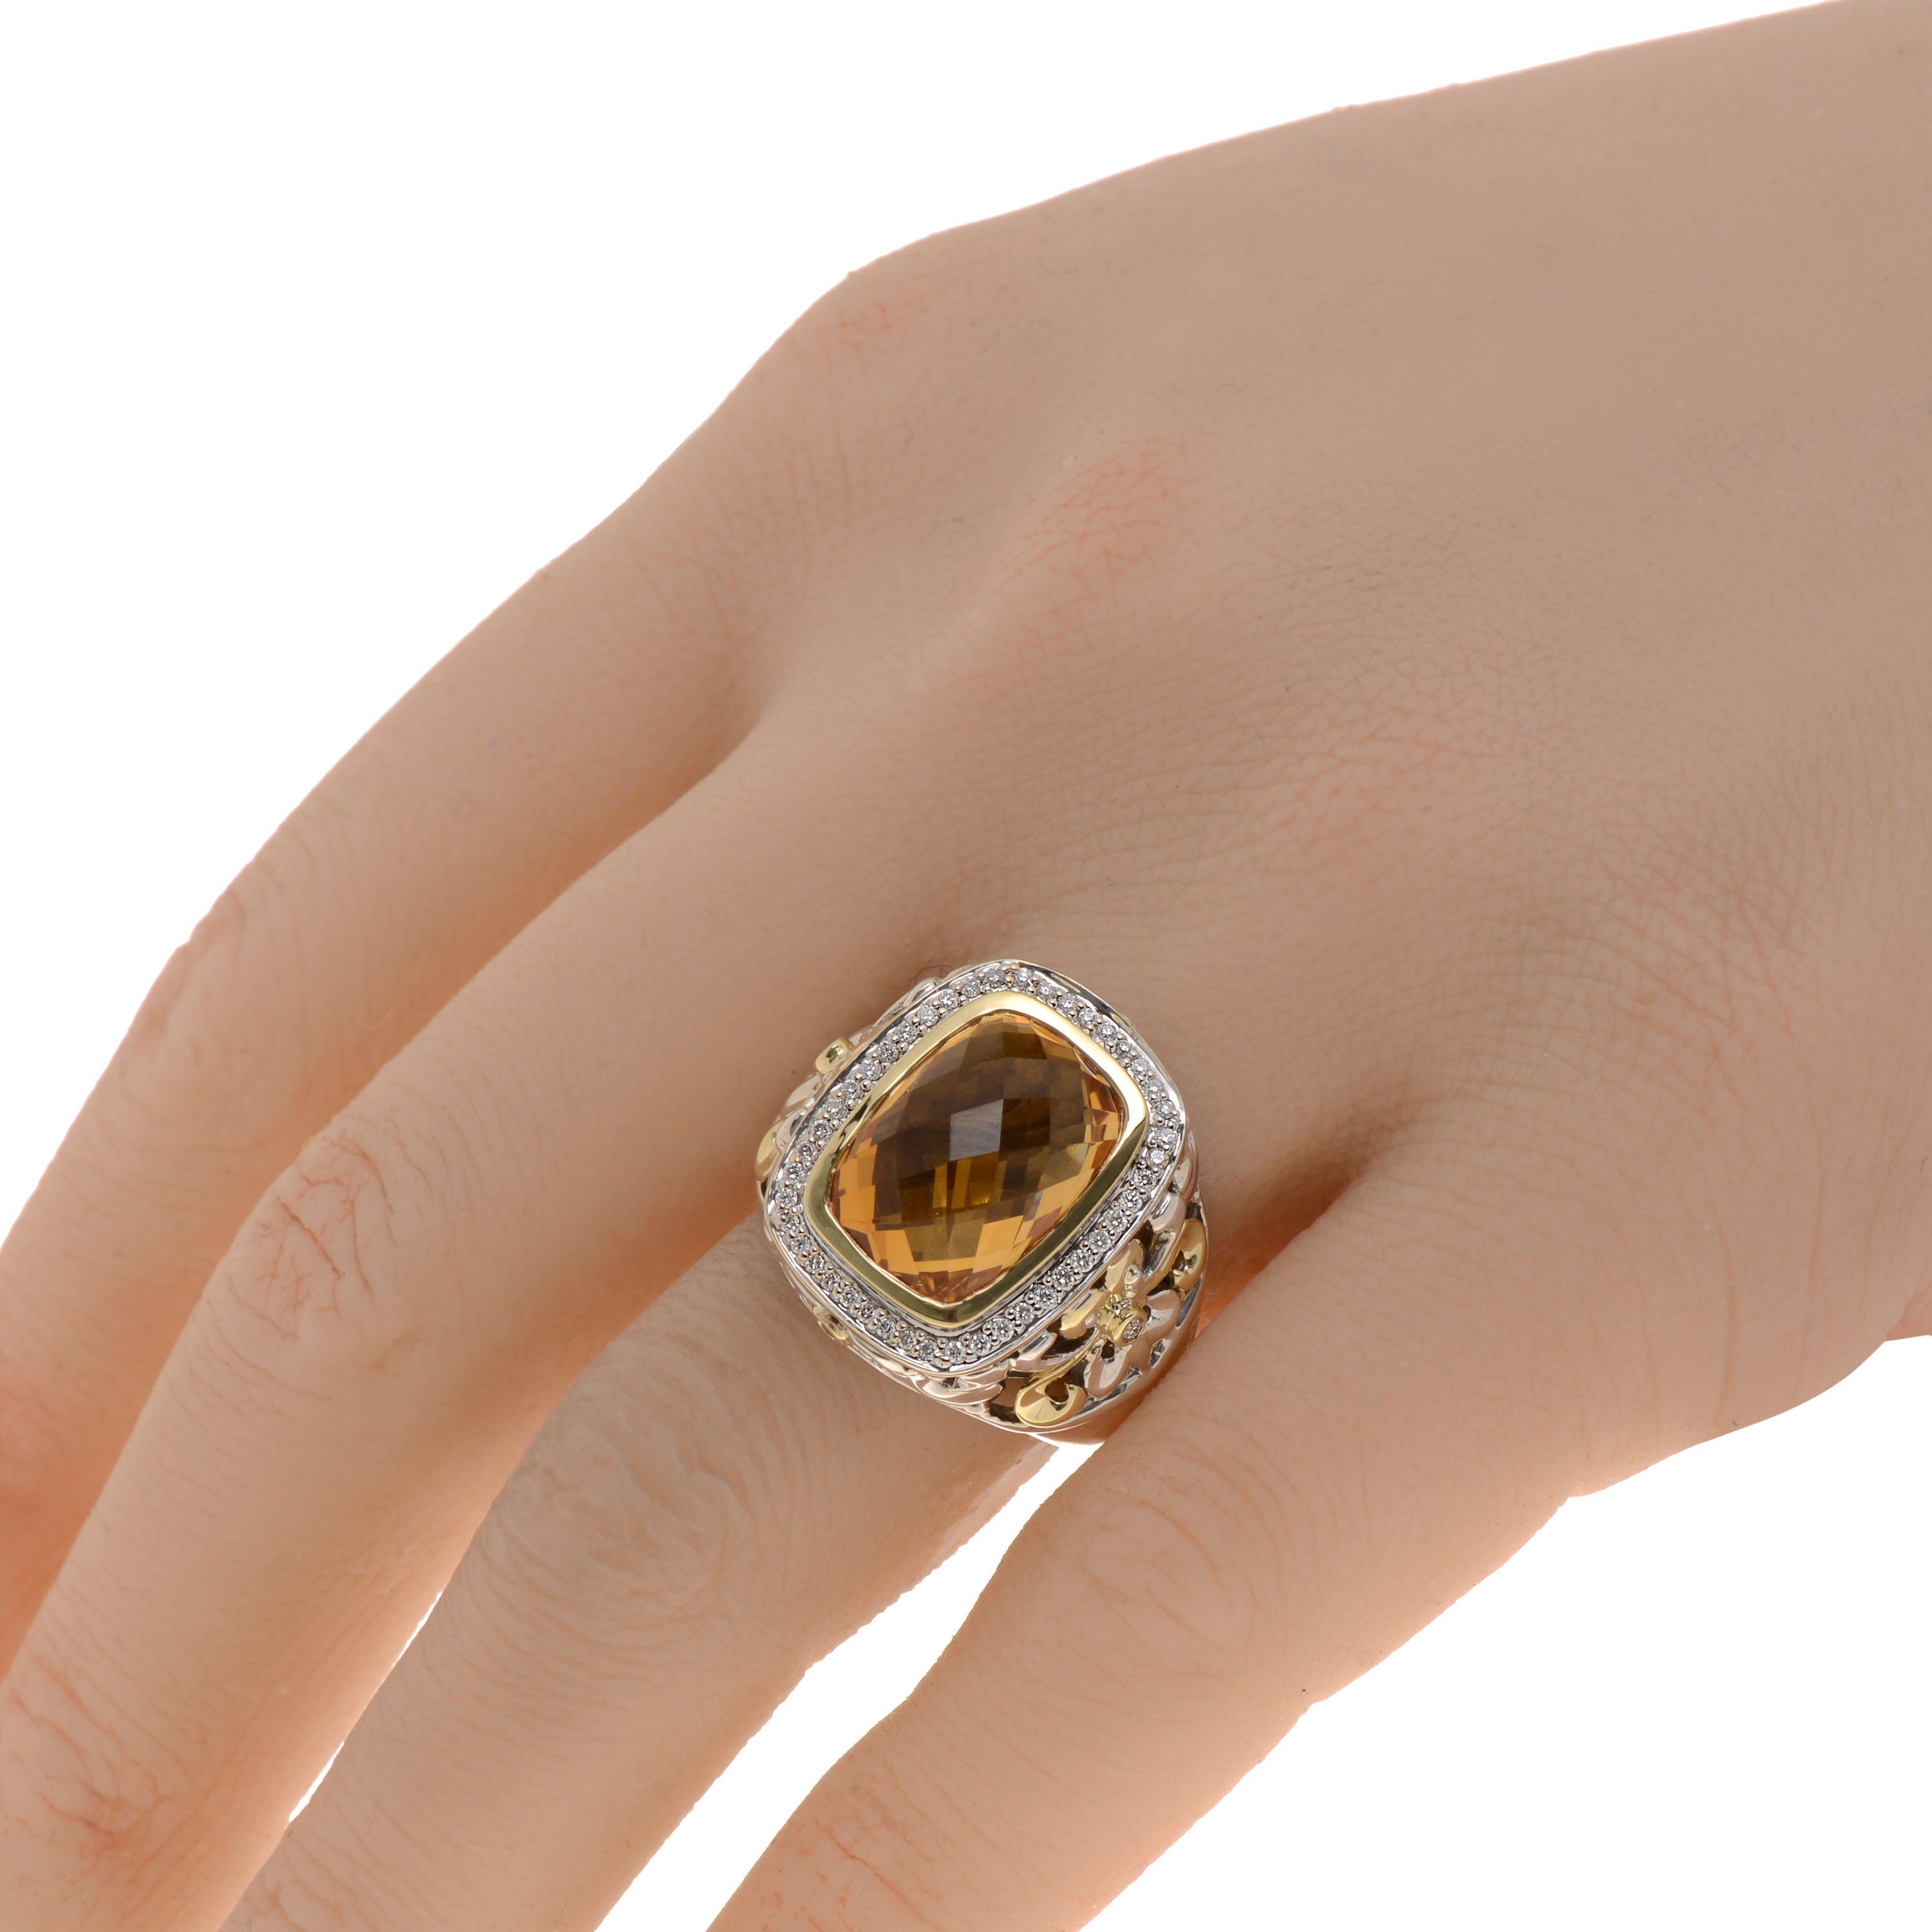 title:Charles Krypell Women's Sterling Silver Citrine Ring 3-6440-SCD;color:not applicable